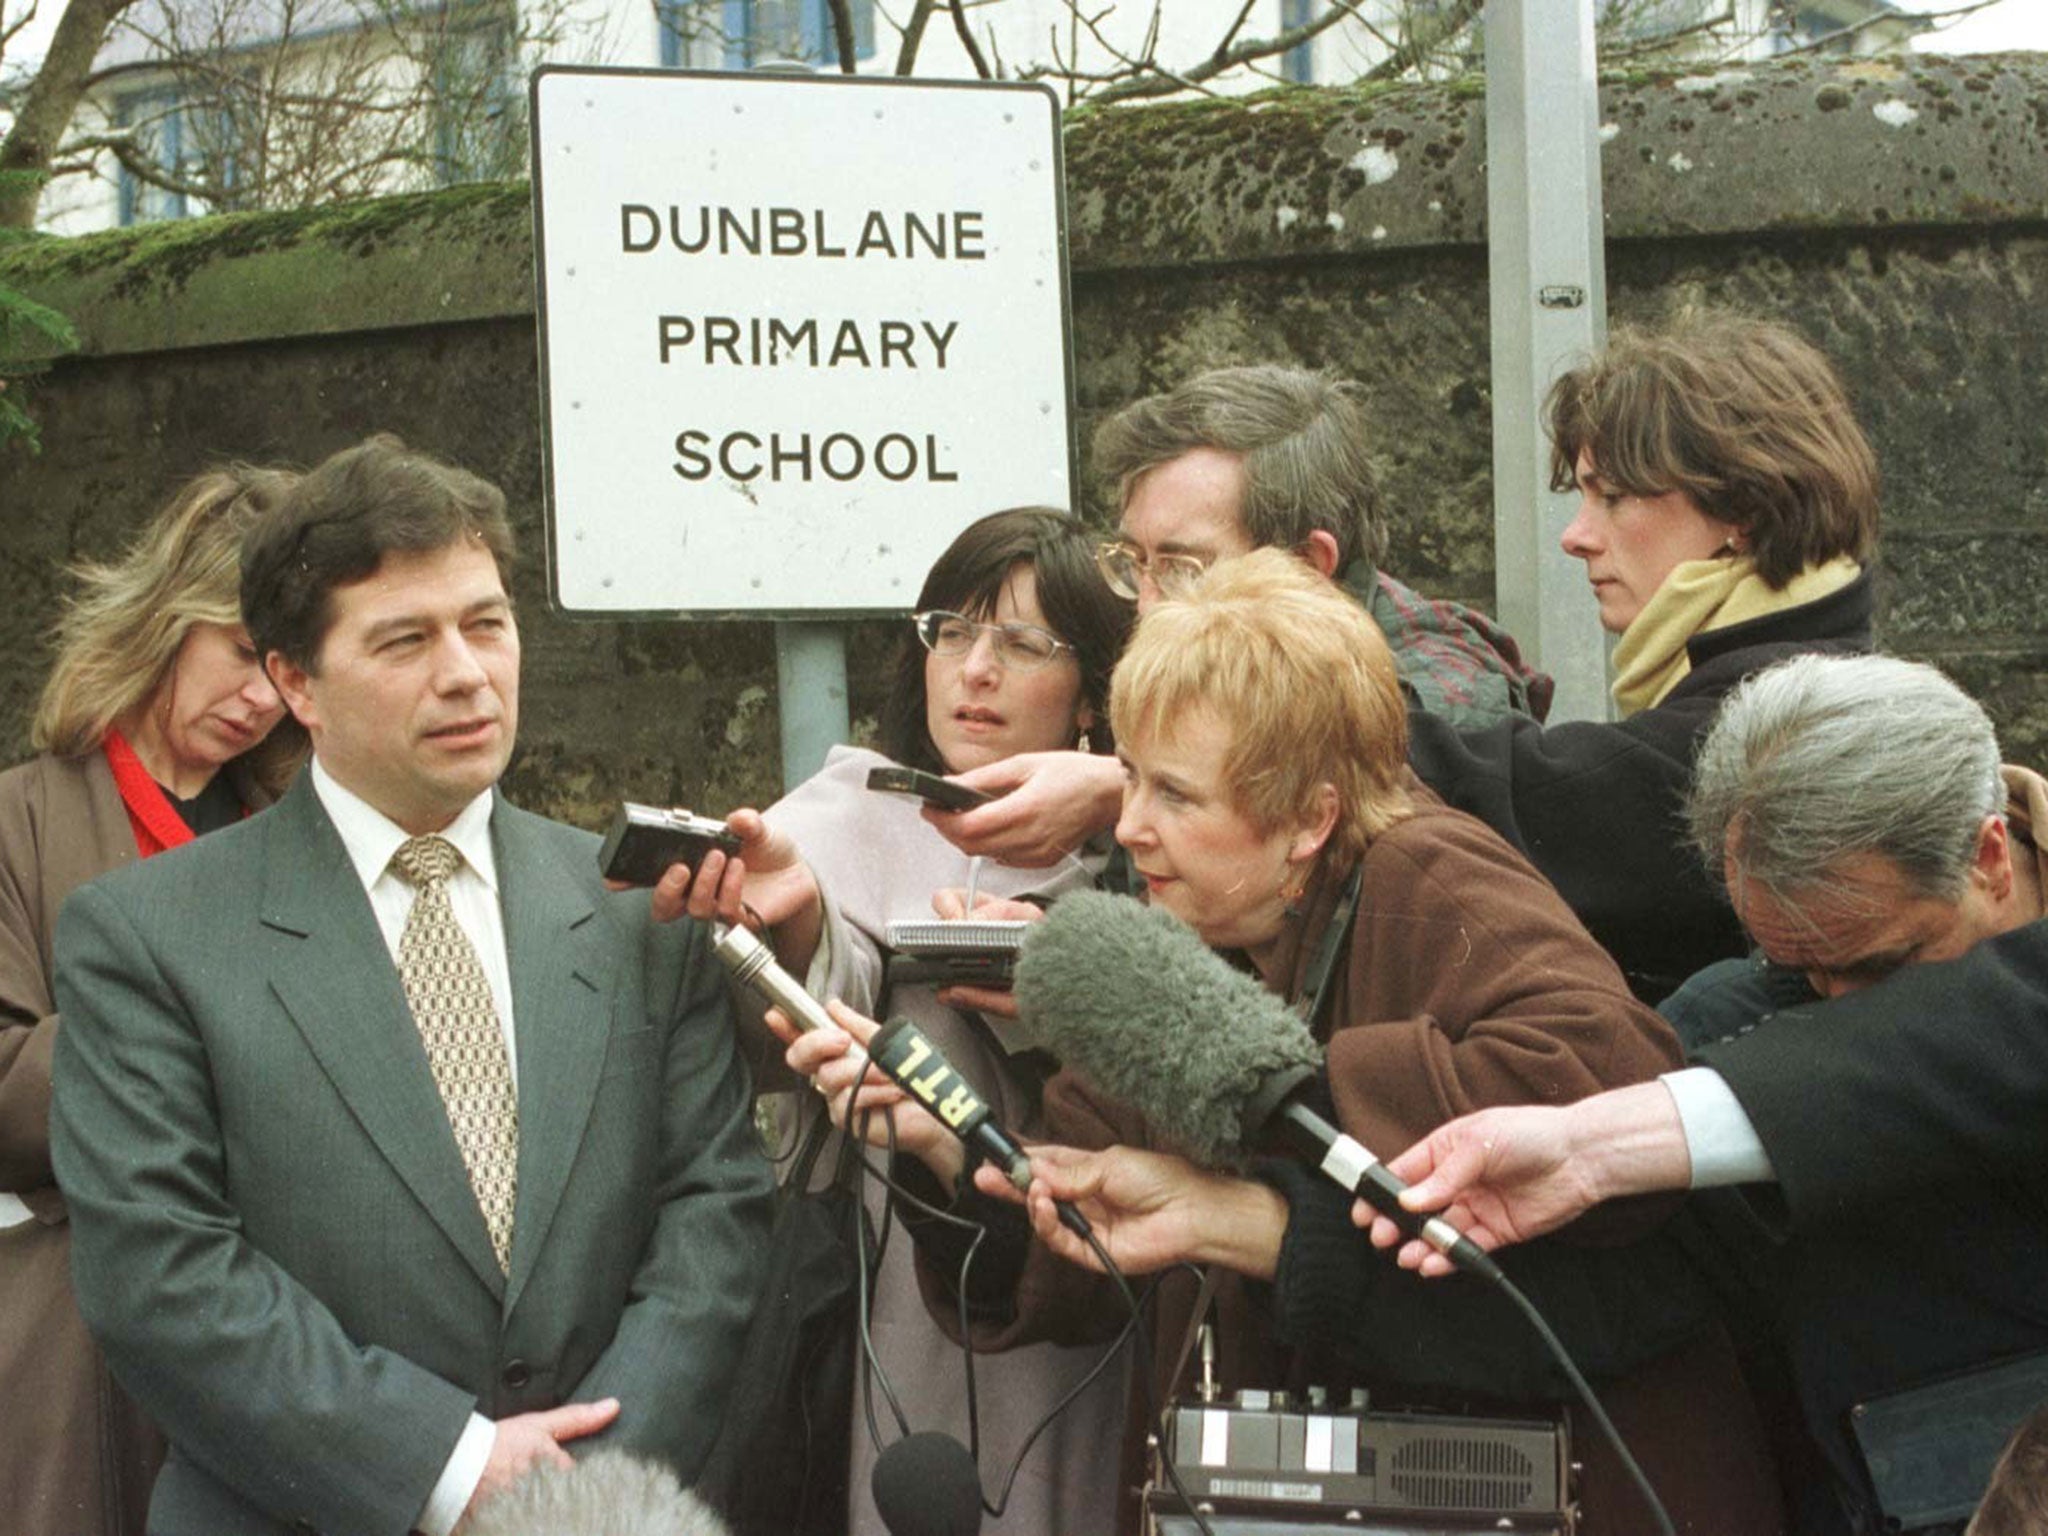 Dunblane Primary School head teacher Ron Taylor speaking to reporters on the day pupils returned following the Dunblane massacre, 22 March 1996